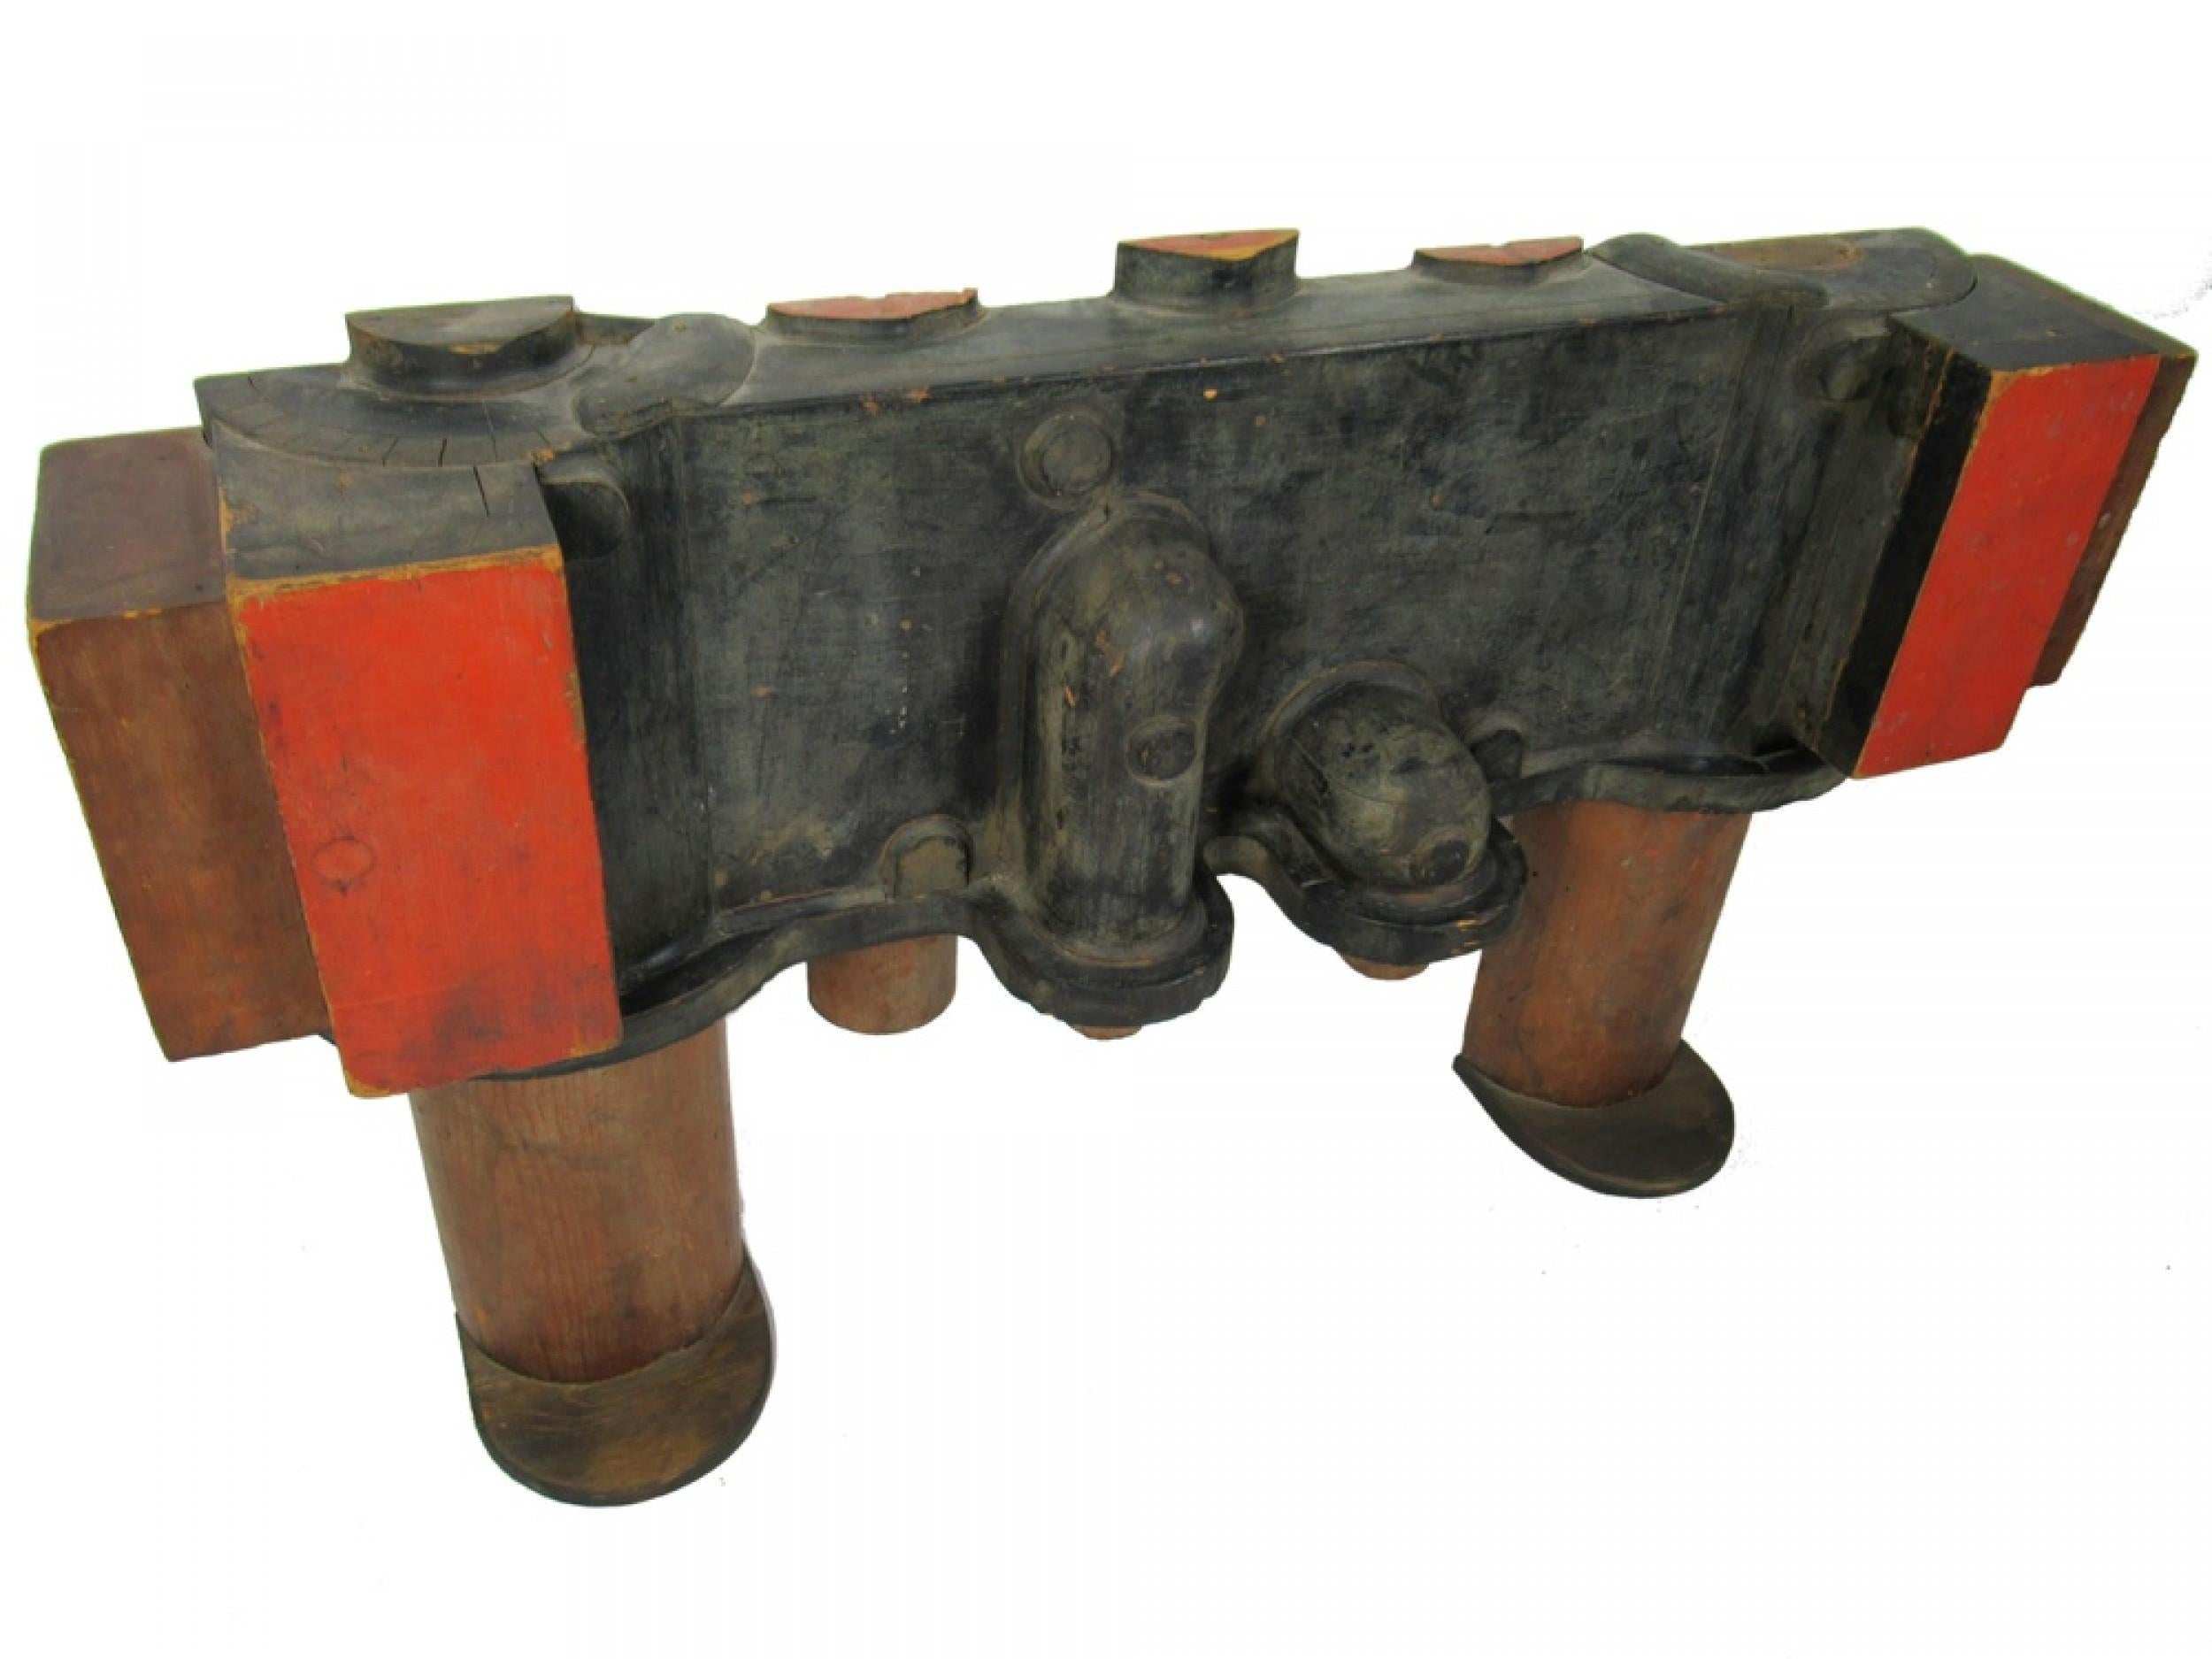 Contemporary American abstract sculpture constructed from industrial molds and painted wood.